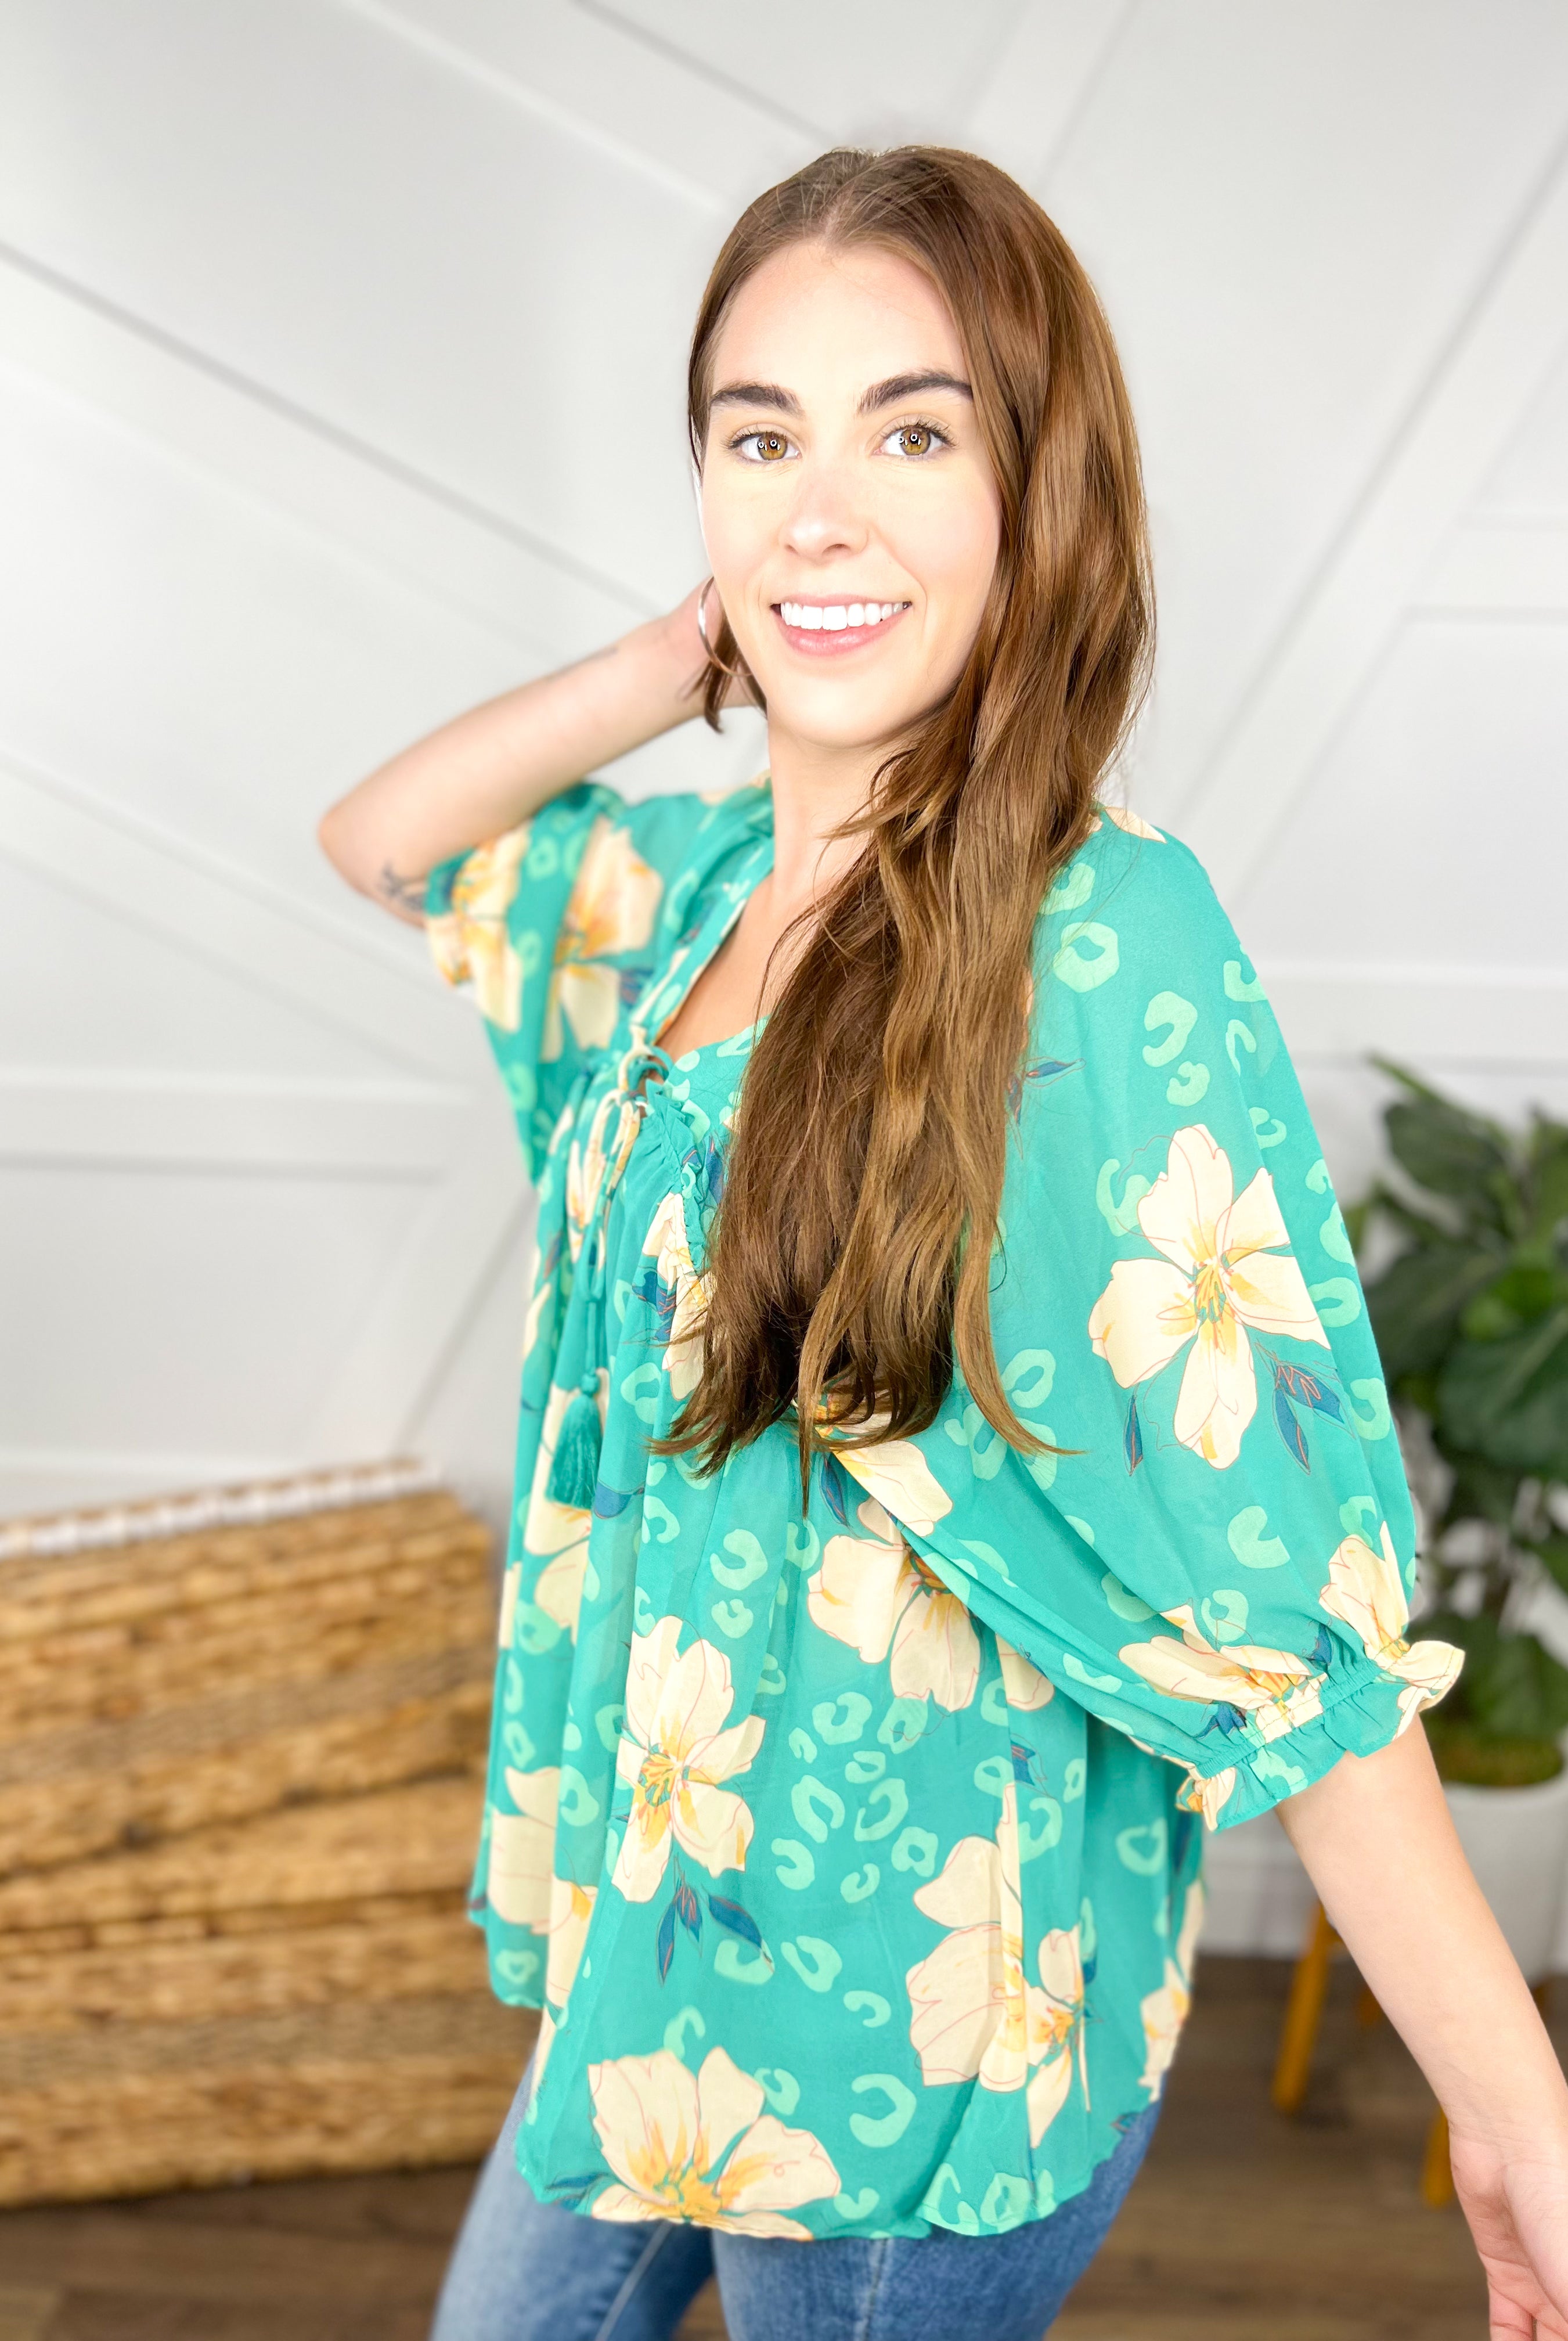 Whimsical Blouse Top-110 Short Sleeve Top-Easel-Heathered Boho Boutique, Women's Fashion and Accessories in Palmetto, FL